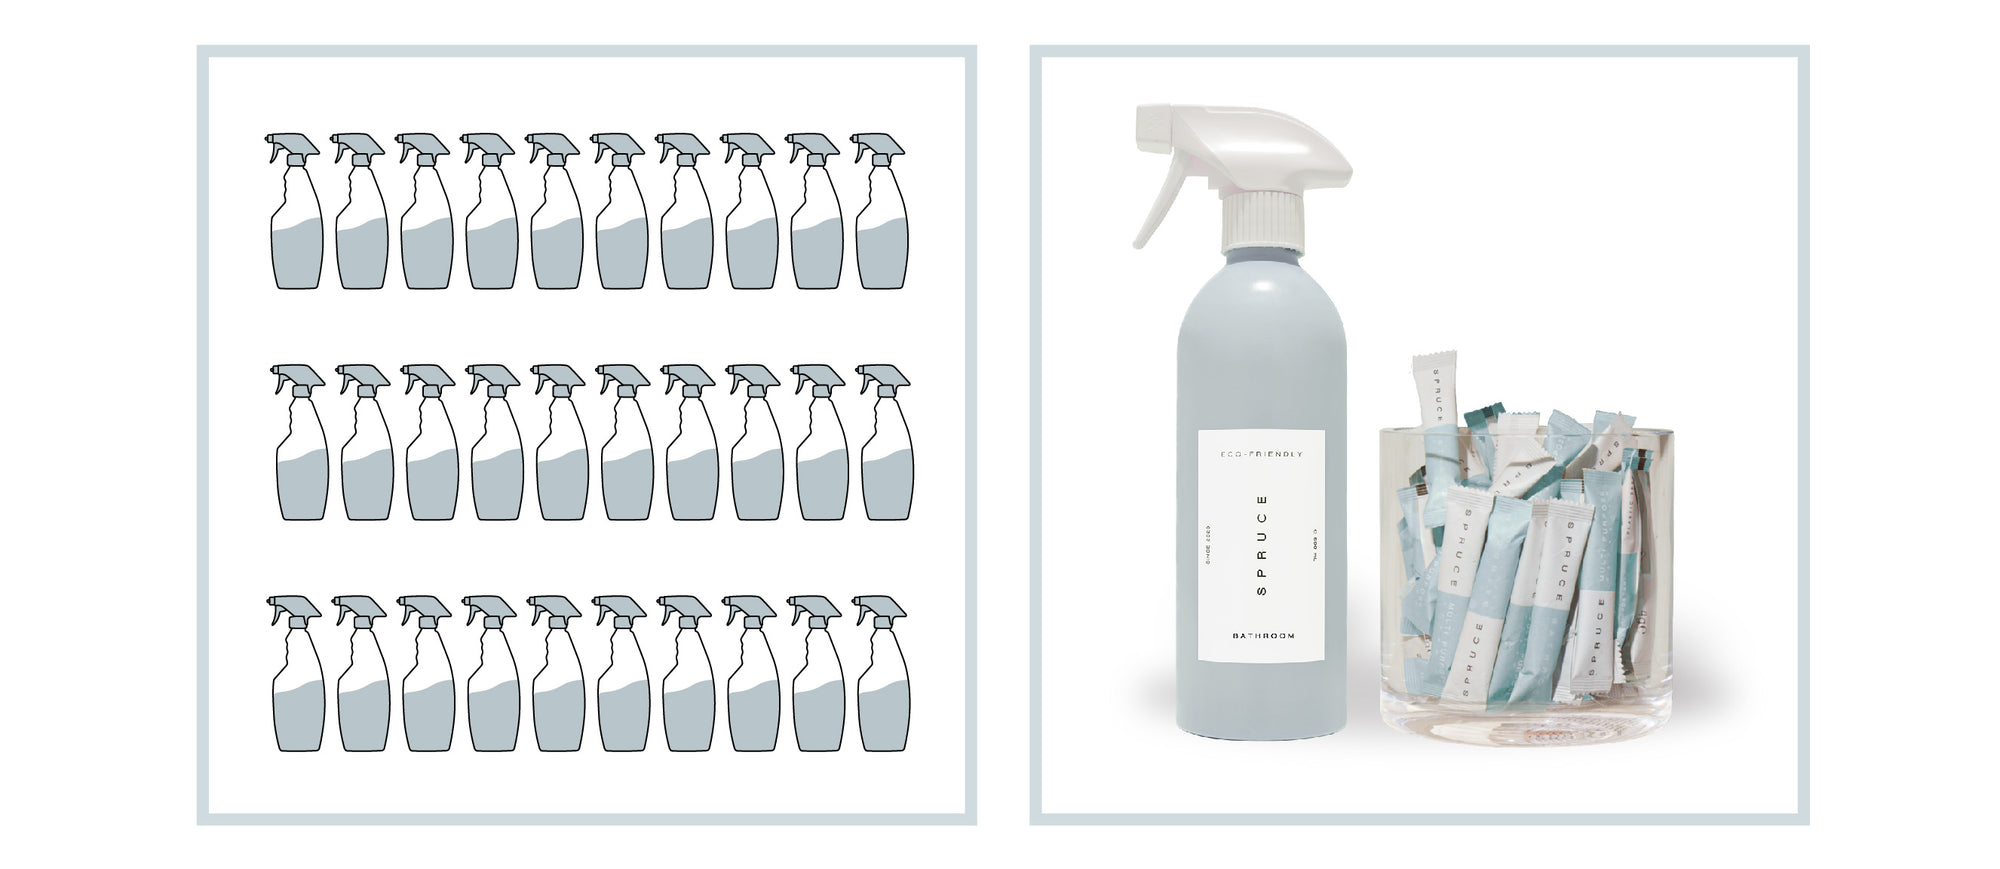 30 plastic tile cleaner spray versus Spruce space-saving compostable cleaning refills